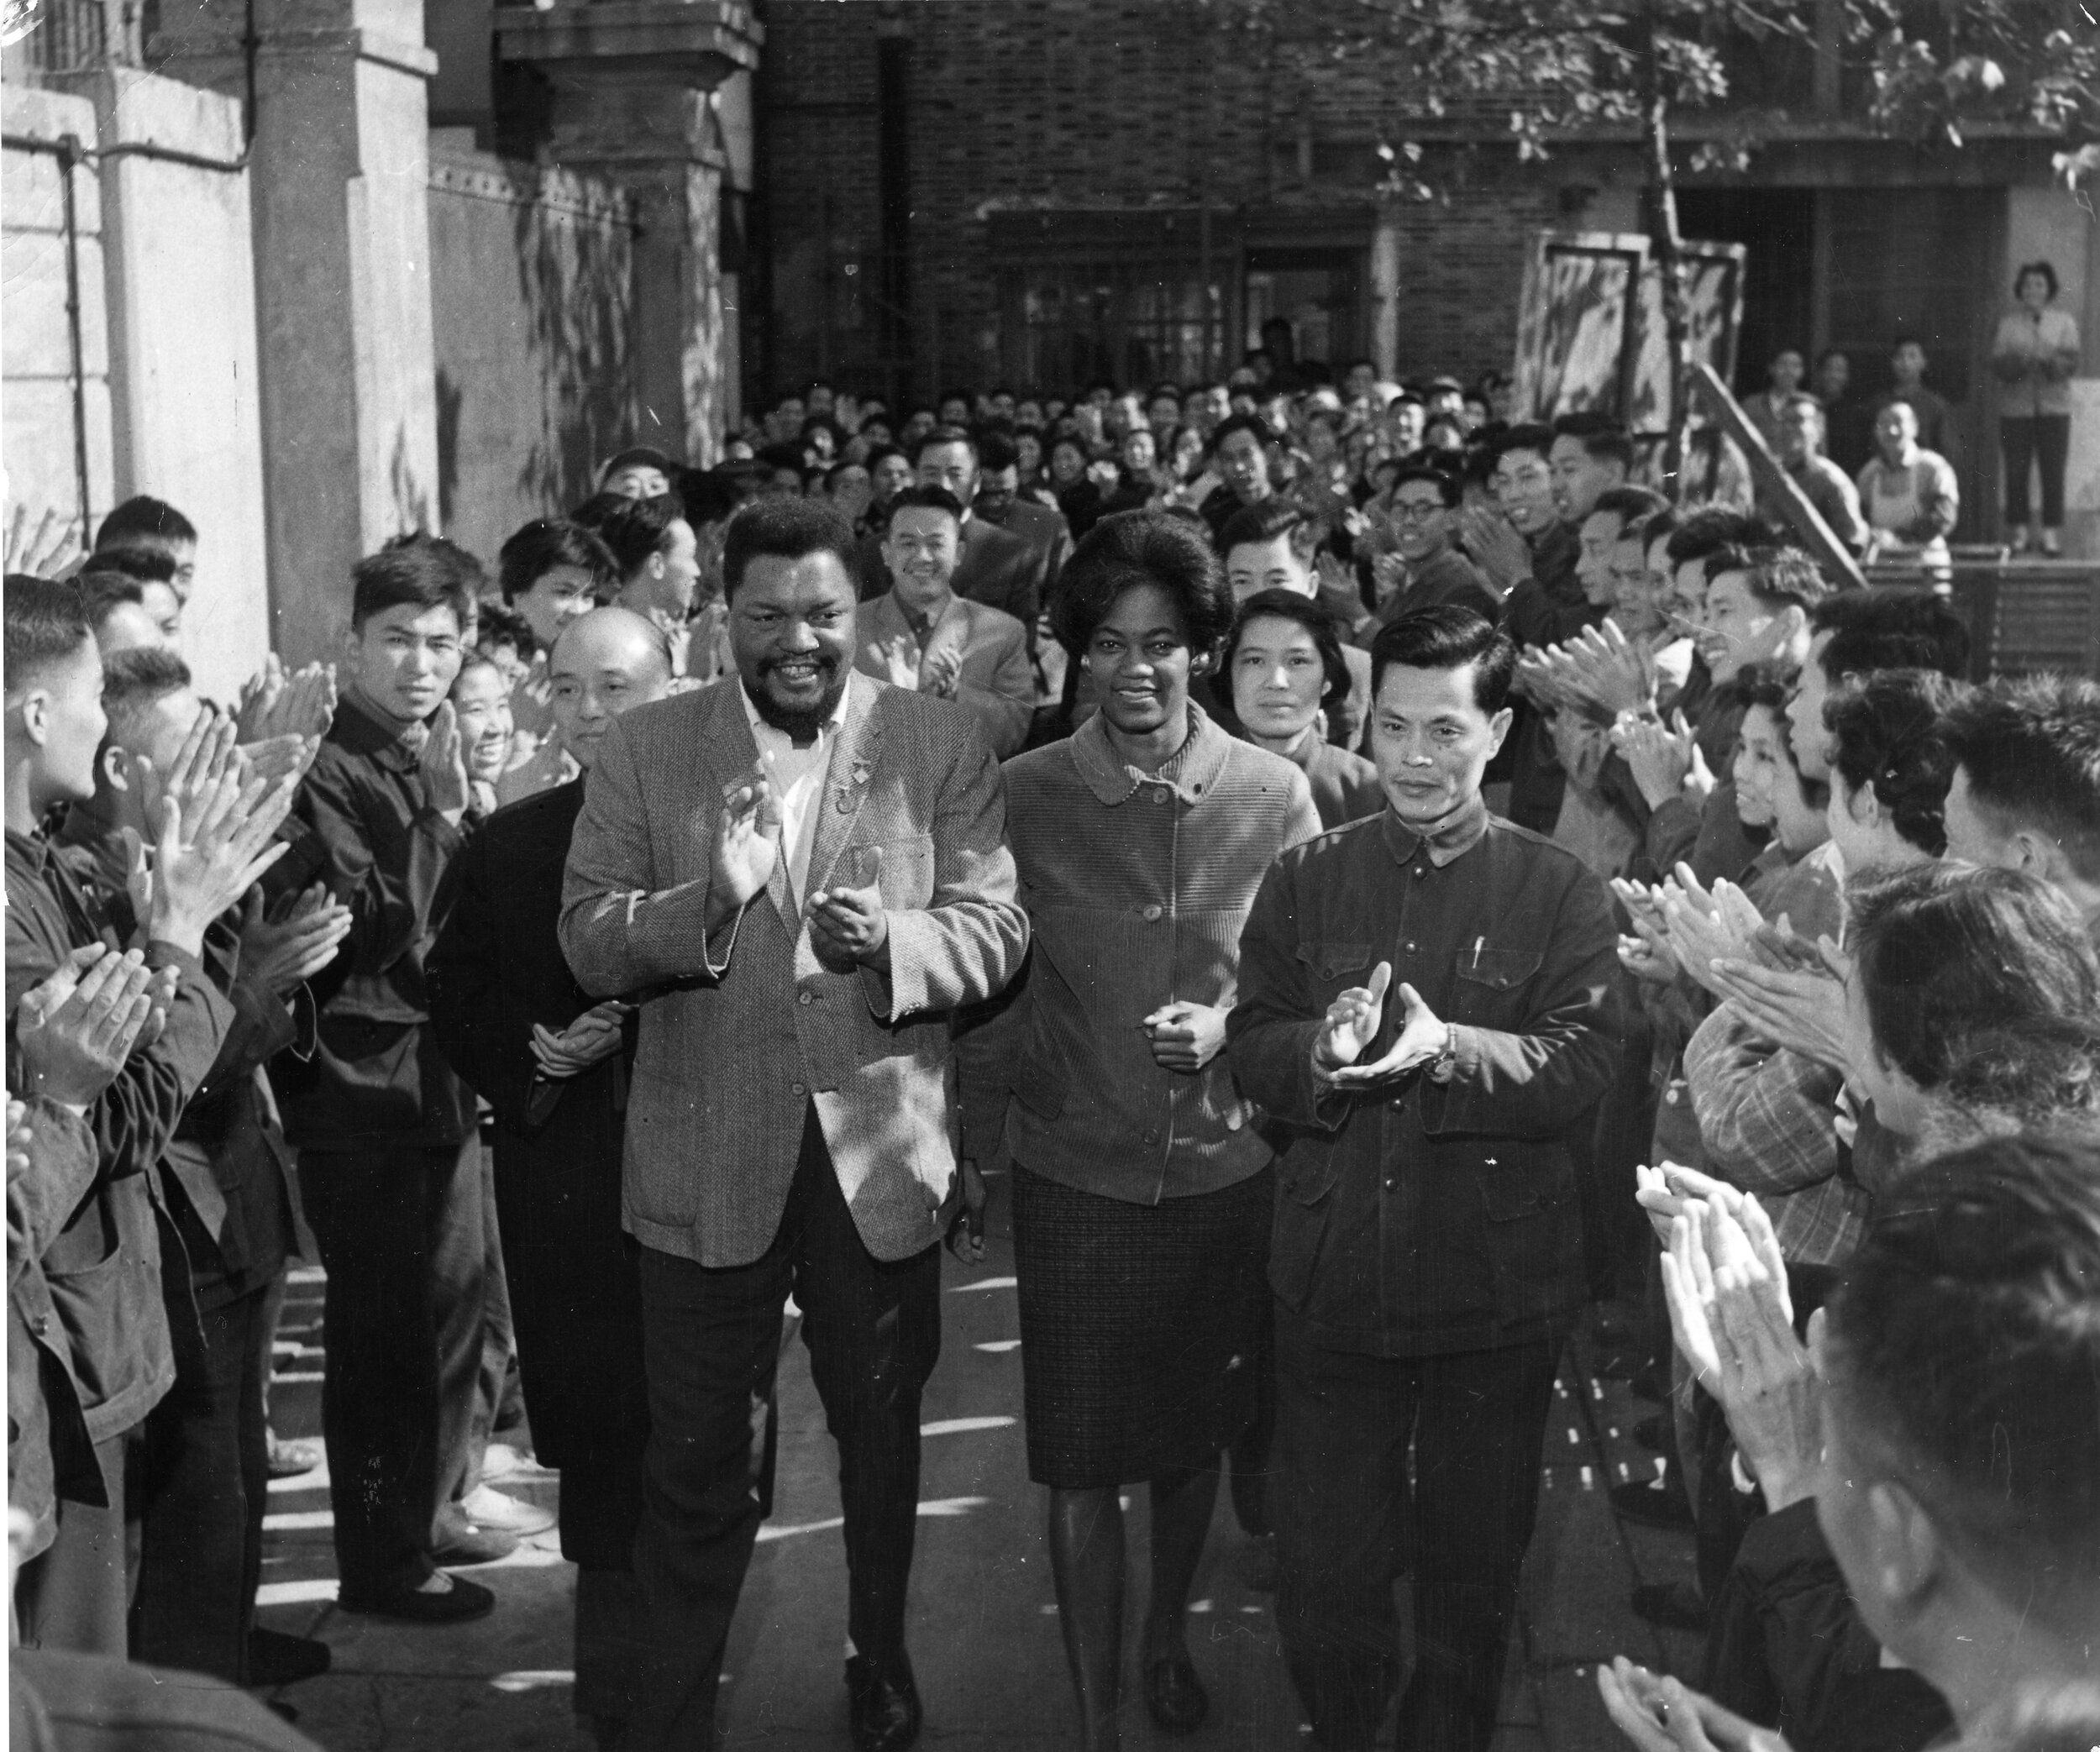  During the 1960s, China’s Communists attempted to cultivate relations with leftist activists in the United States. Here’s Robert Williams, an African-American radical, being feted in Beijing.  